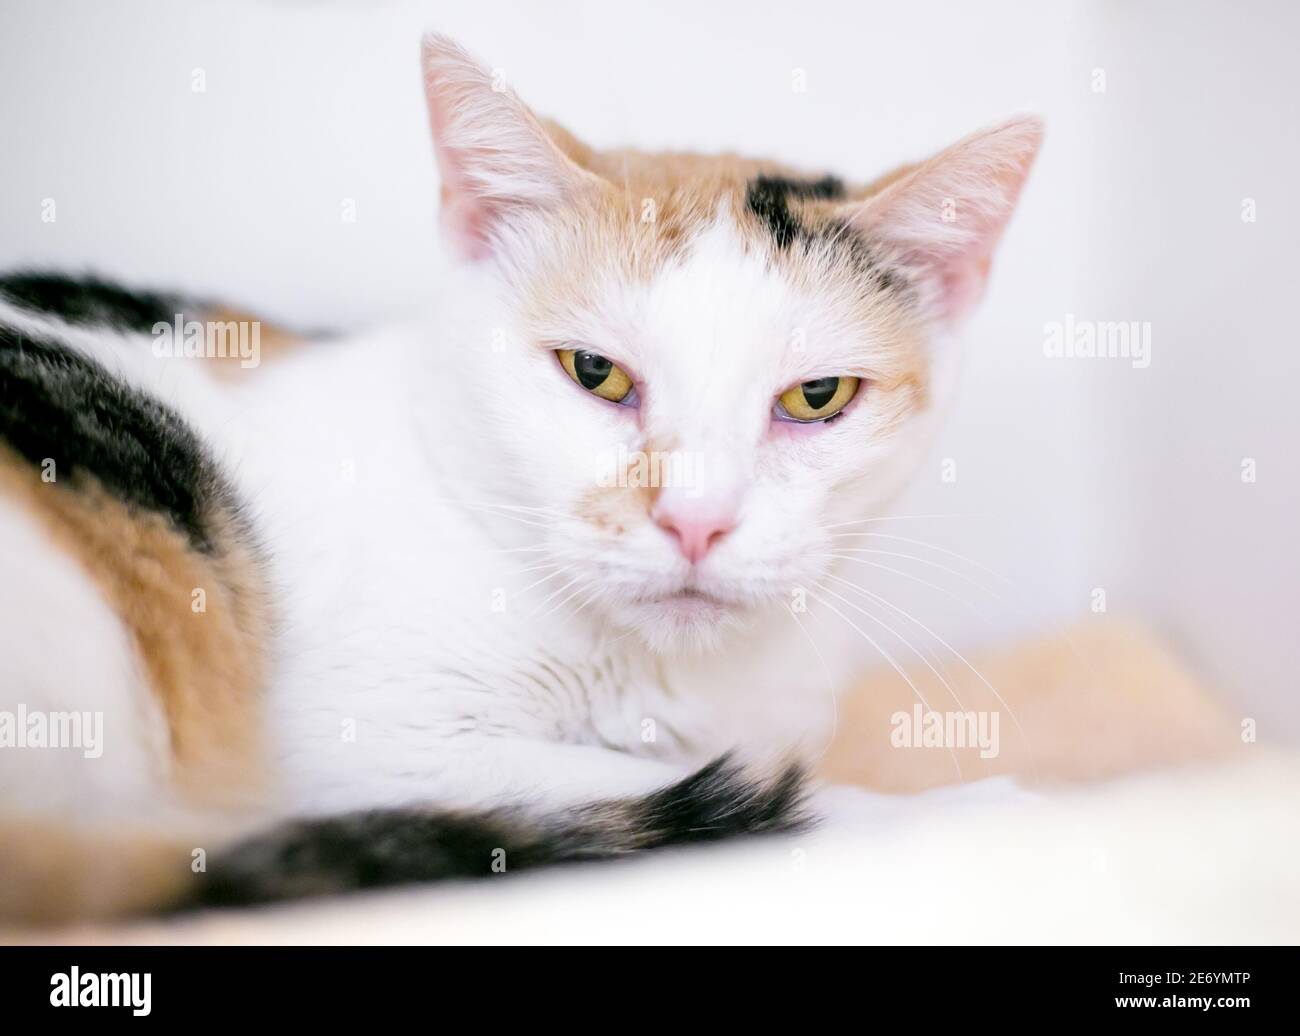 A Calico shorthair cat lying down and looking at the camera with a grumpy expression Stock Photo